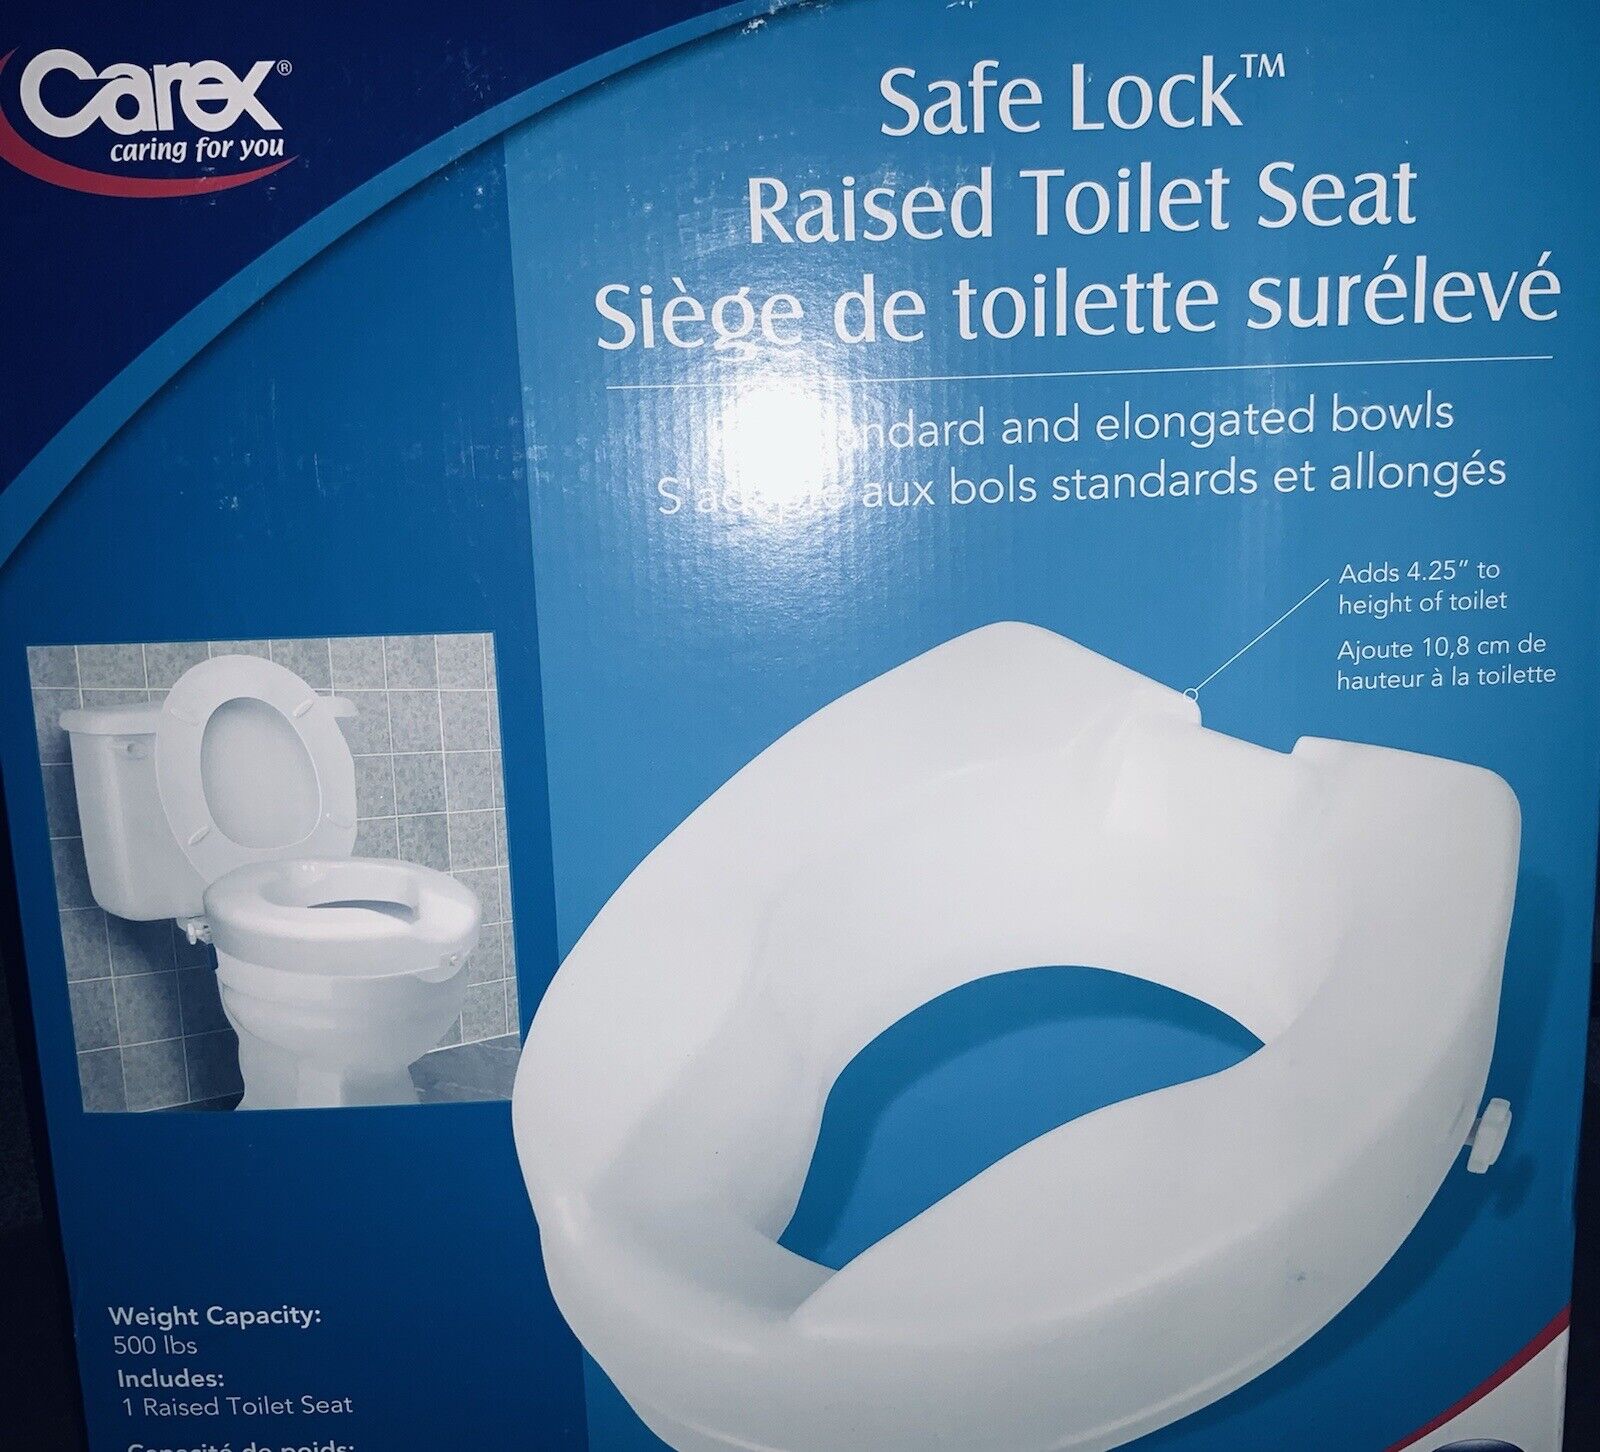 Carex Safe Lock Raised Toilet Seat, Adds 4.25", Weight Capacity 500 Lbs.